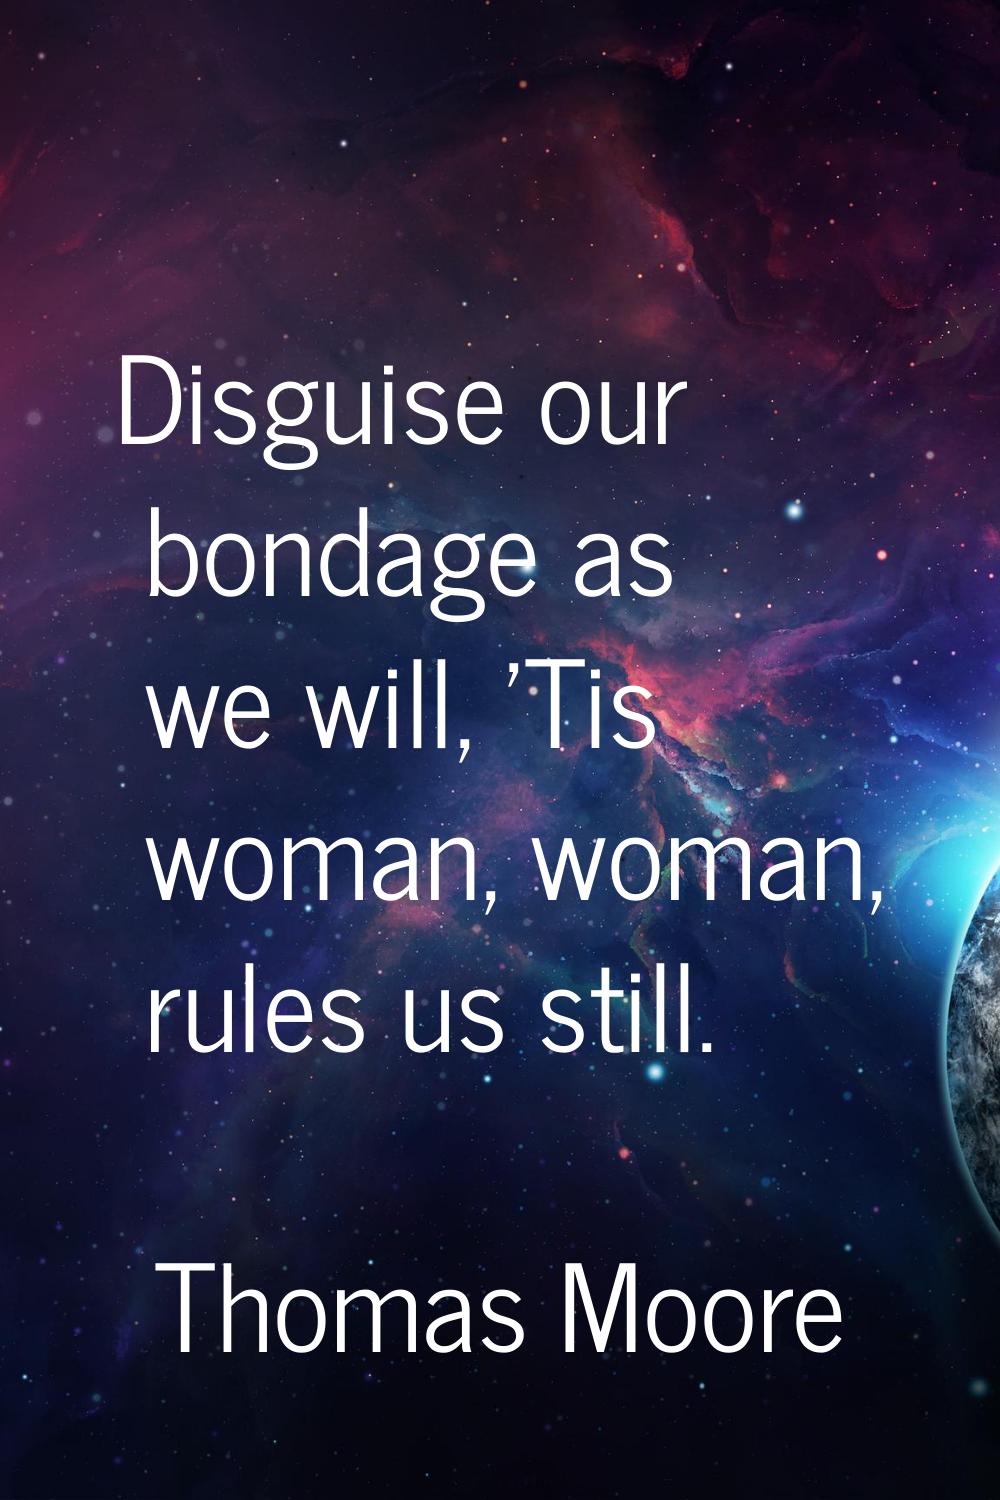 Disguise our bondage as we will, 'Tis woman, woman, rules us still.